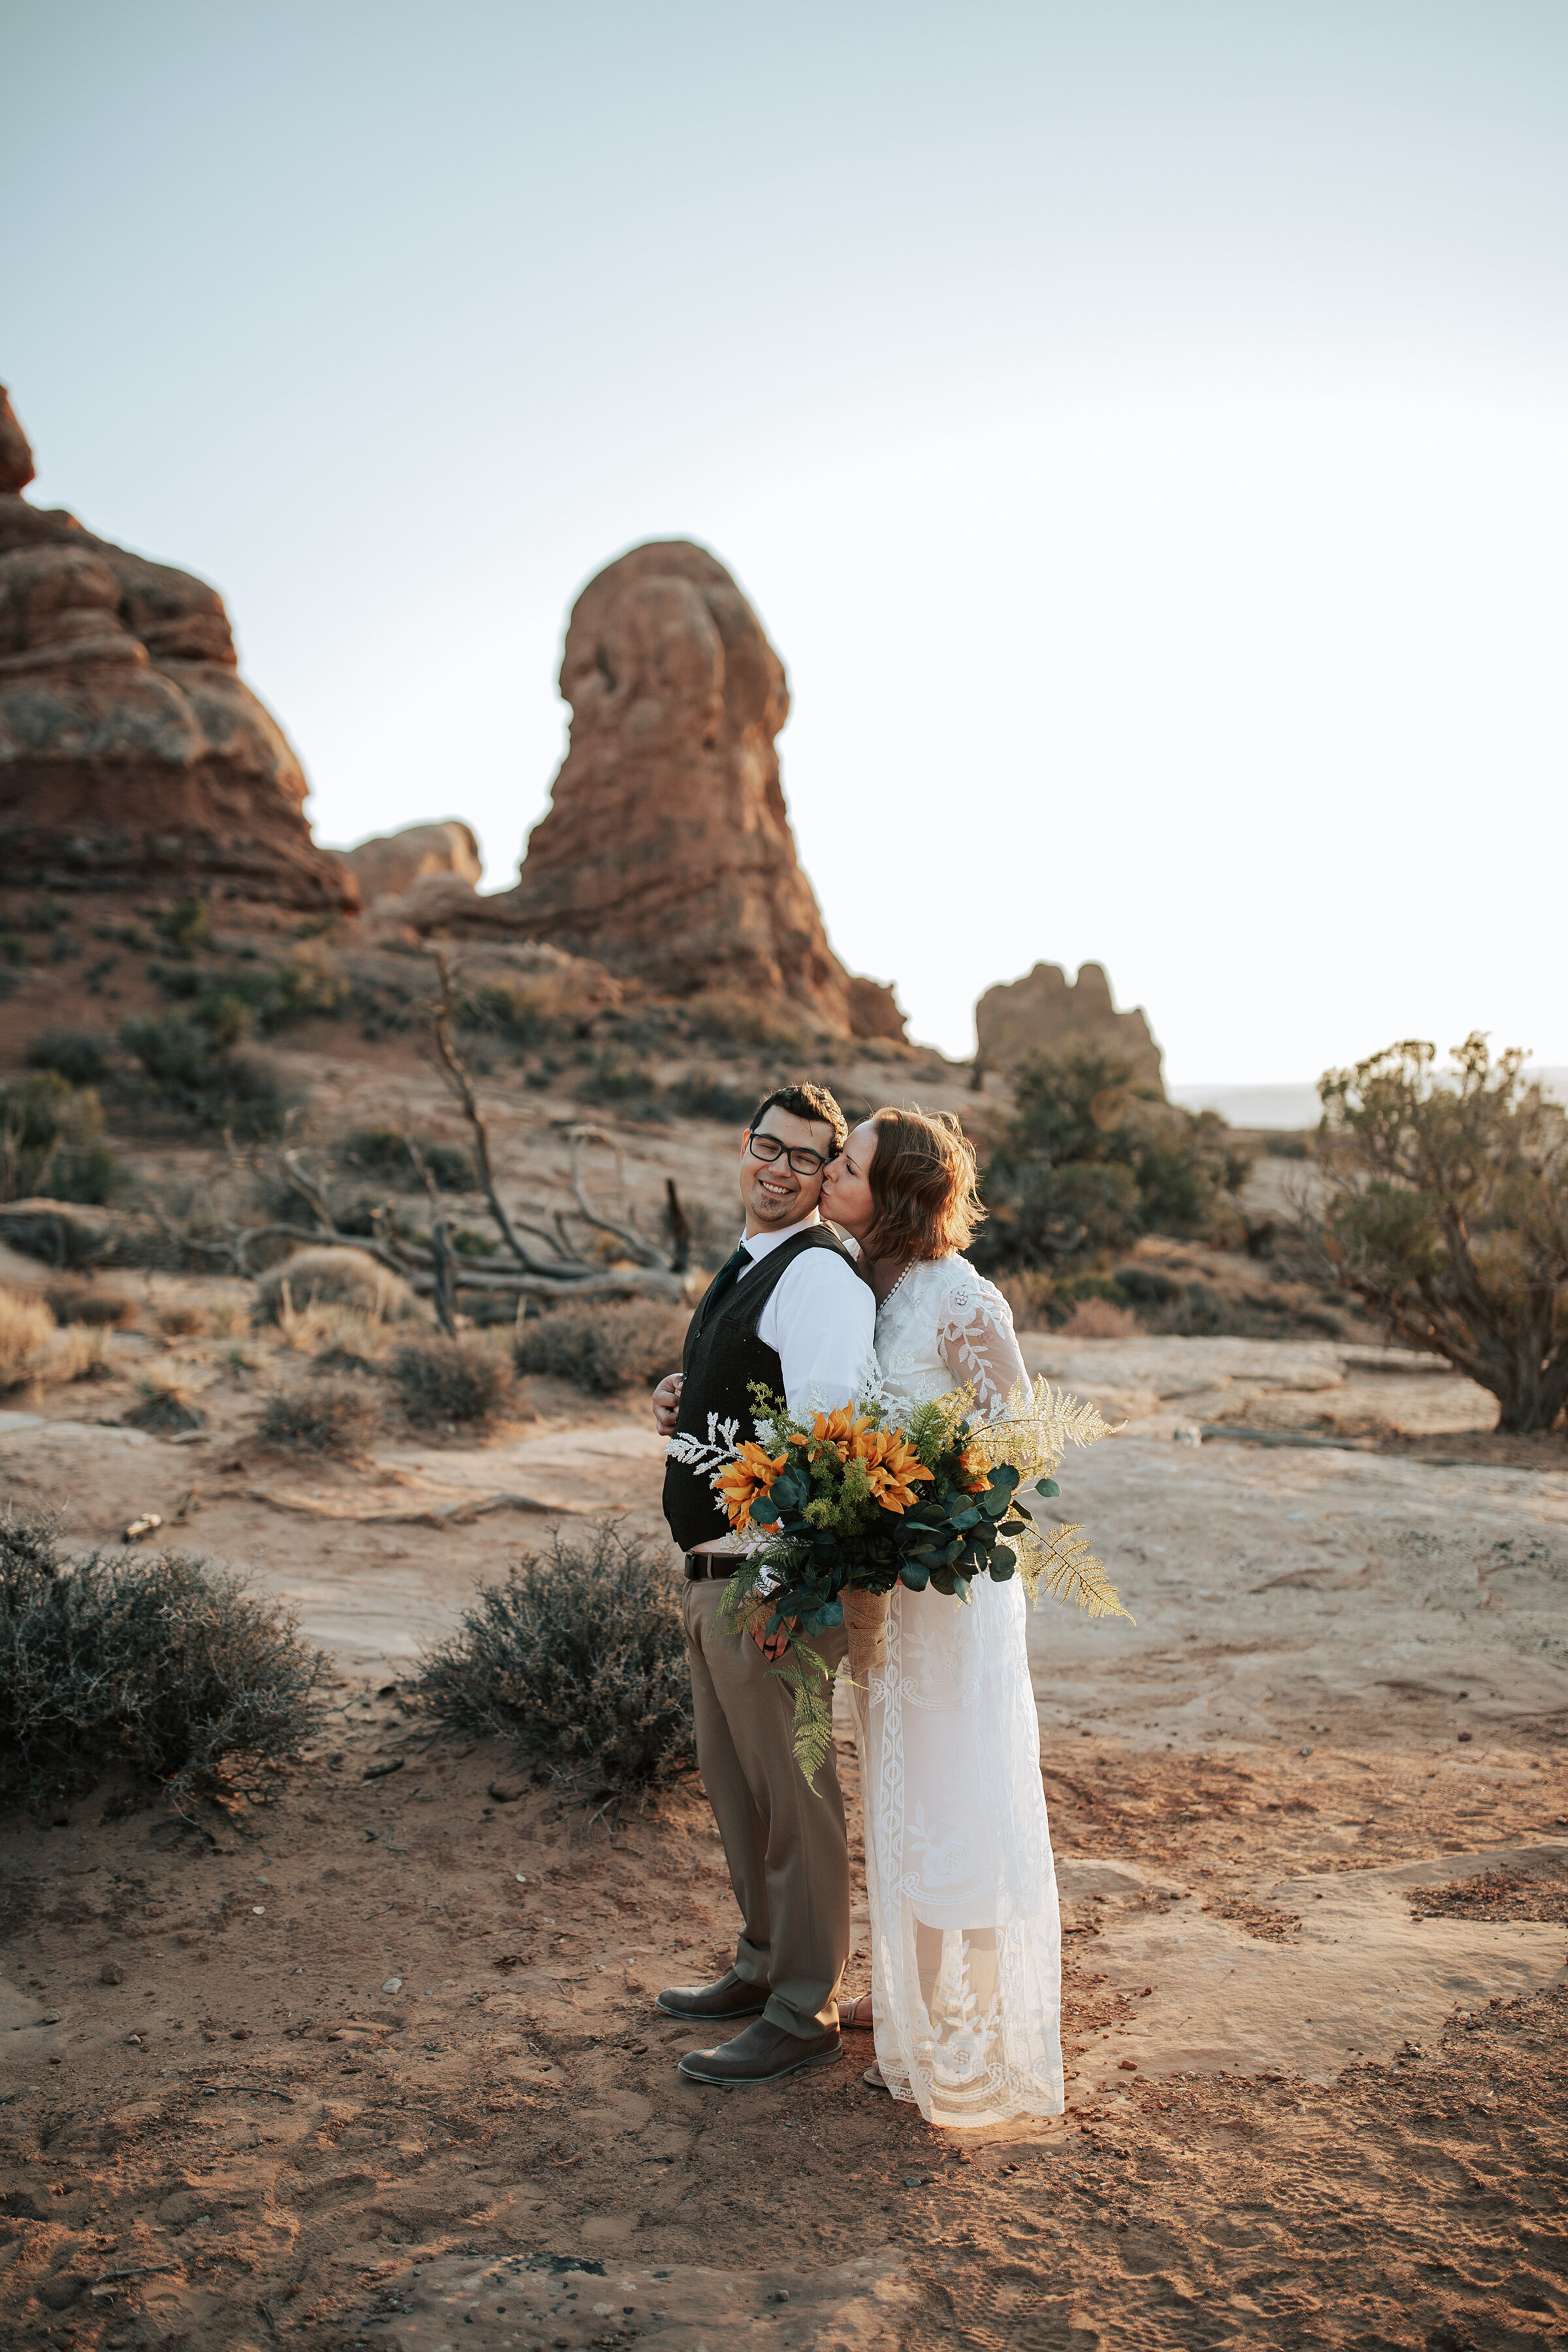  A beautiful bride kisses her husband in the rocks of Utah in a stunning elopement styled photo shoot by Emily Jenkins Photography. Elopement styled photo shoot inspiration elopement attire inspiration for men and women outdoor photo shoot location i